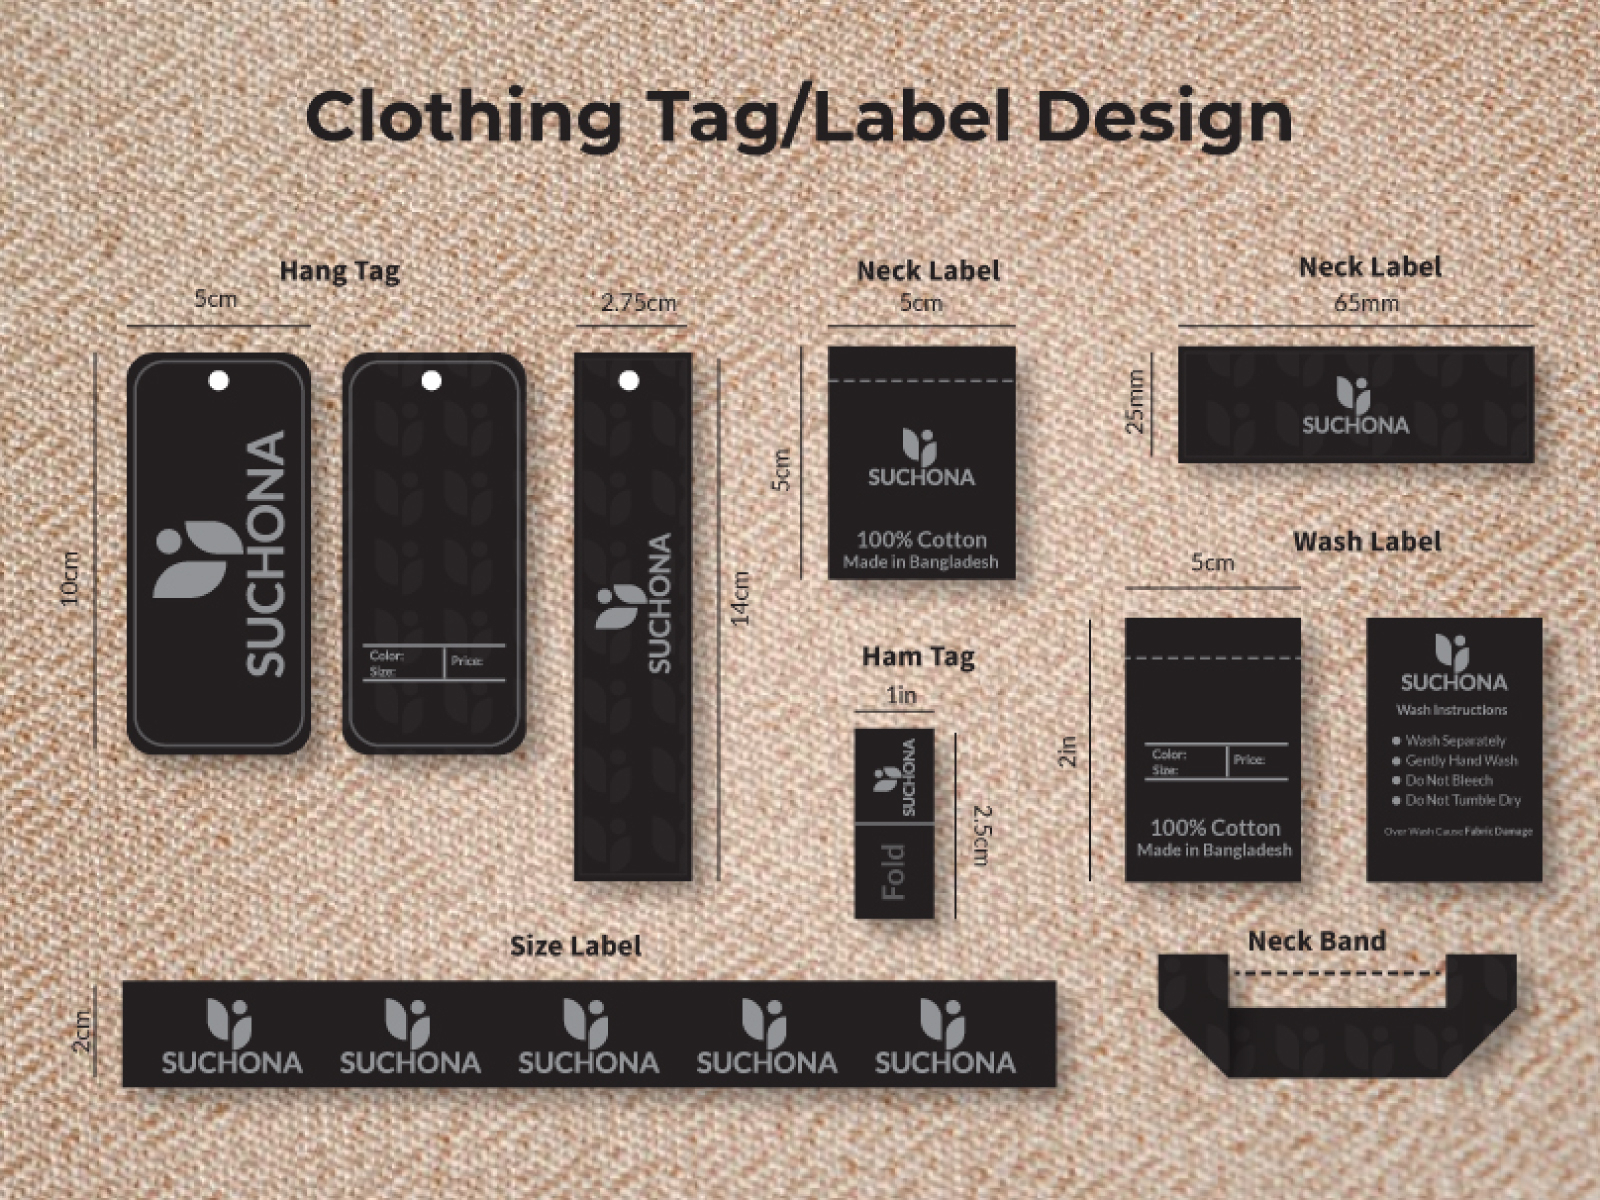 Clothing Hang Tag by Badrul Alam on Dribbble